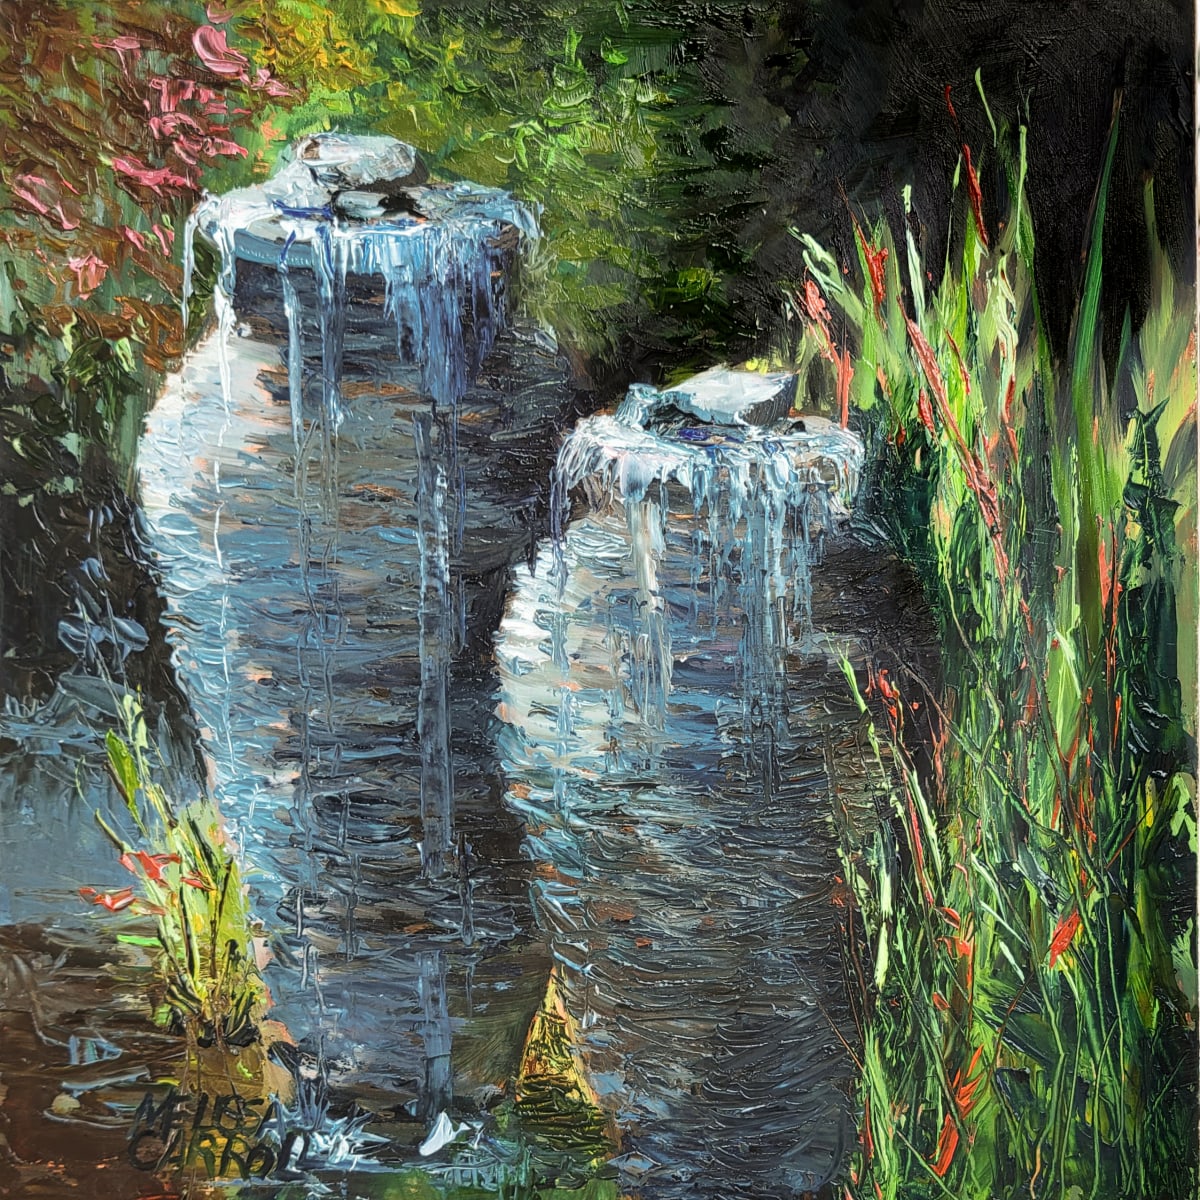 Double Serenity by Melissa Carroll  Image: Plein air finished in the studio from memory and imagination 